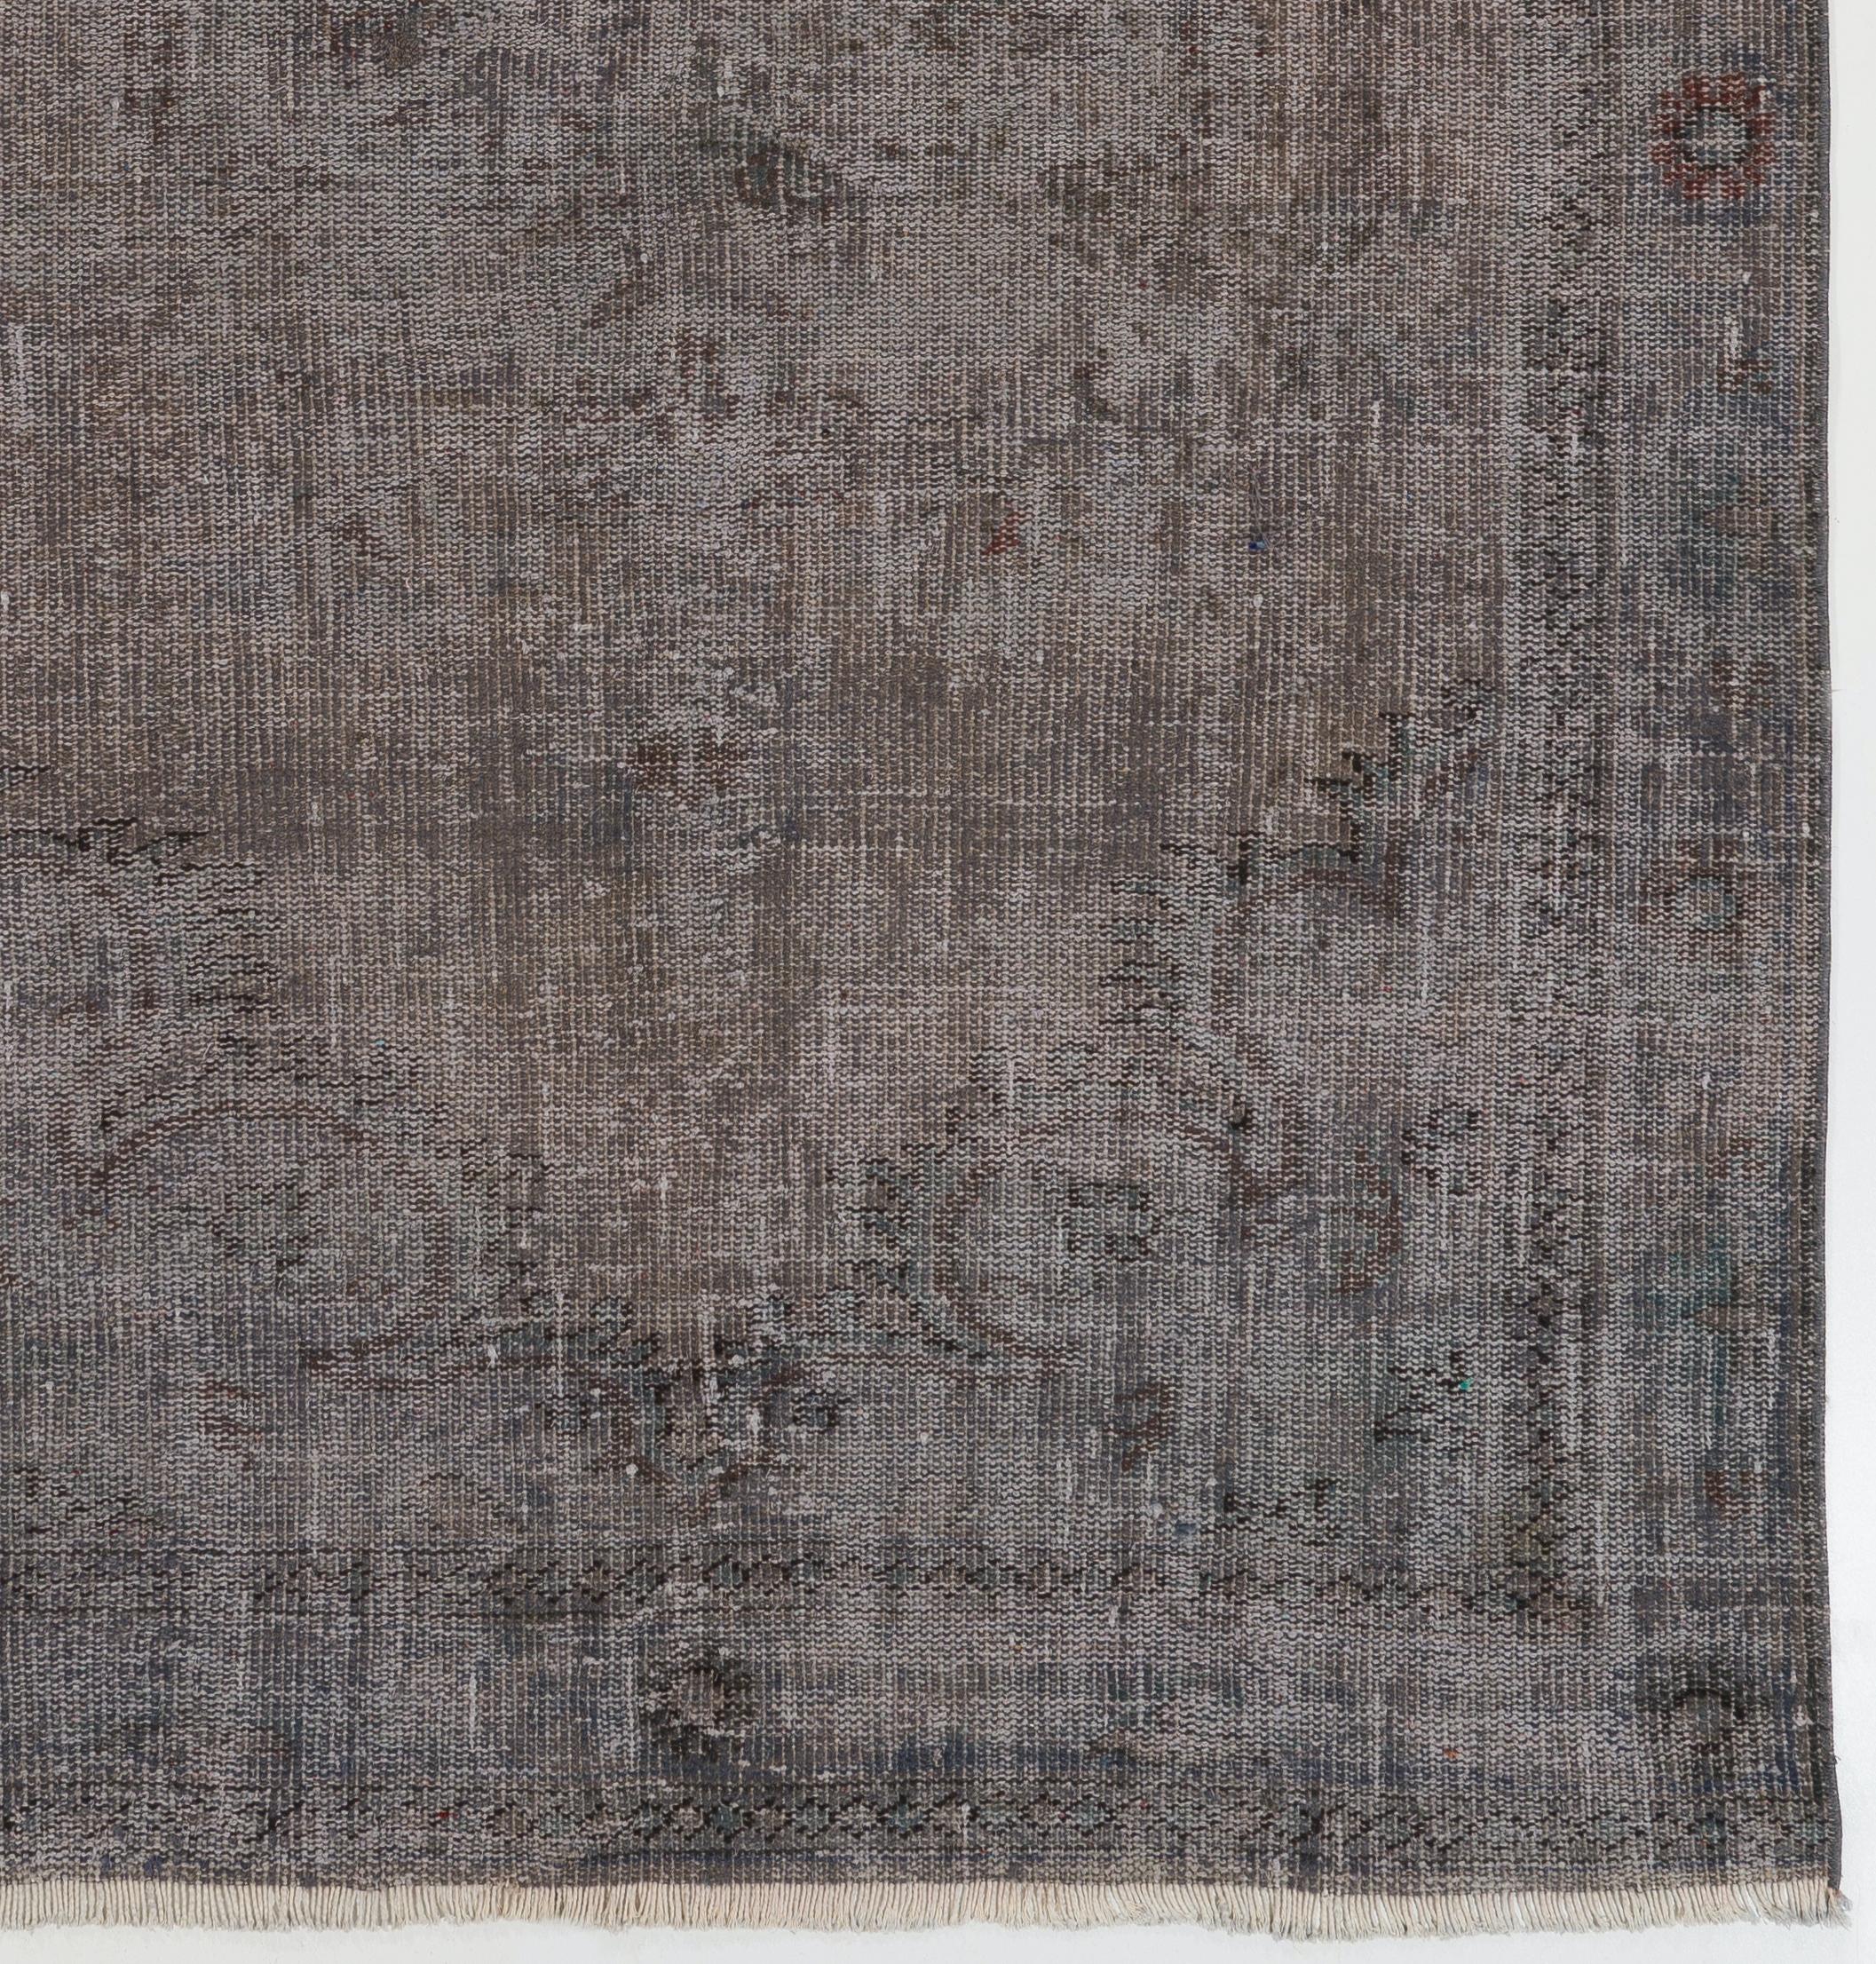 Modern Handmade Shabby Chic Area Rug in Gray, Mid20th Century Turkish Carpet For Sale